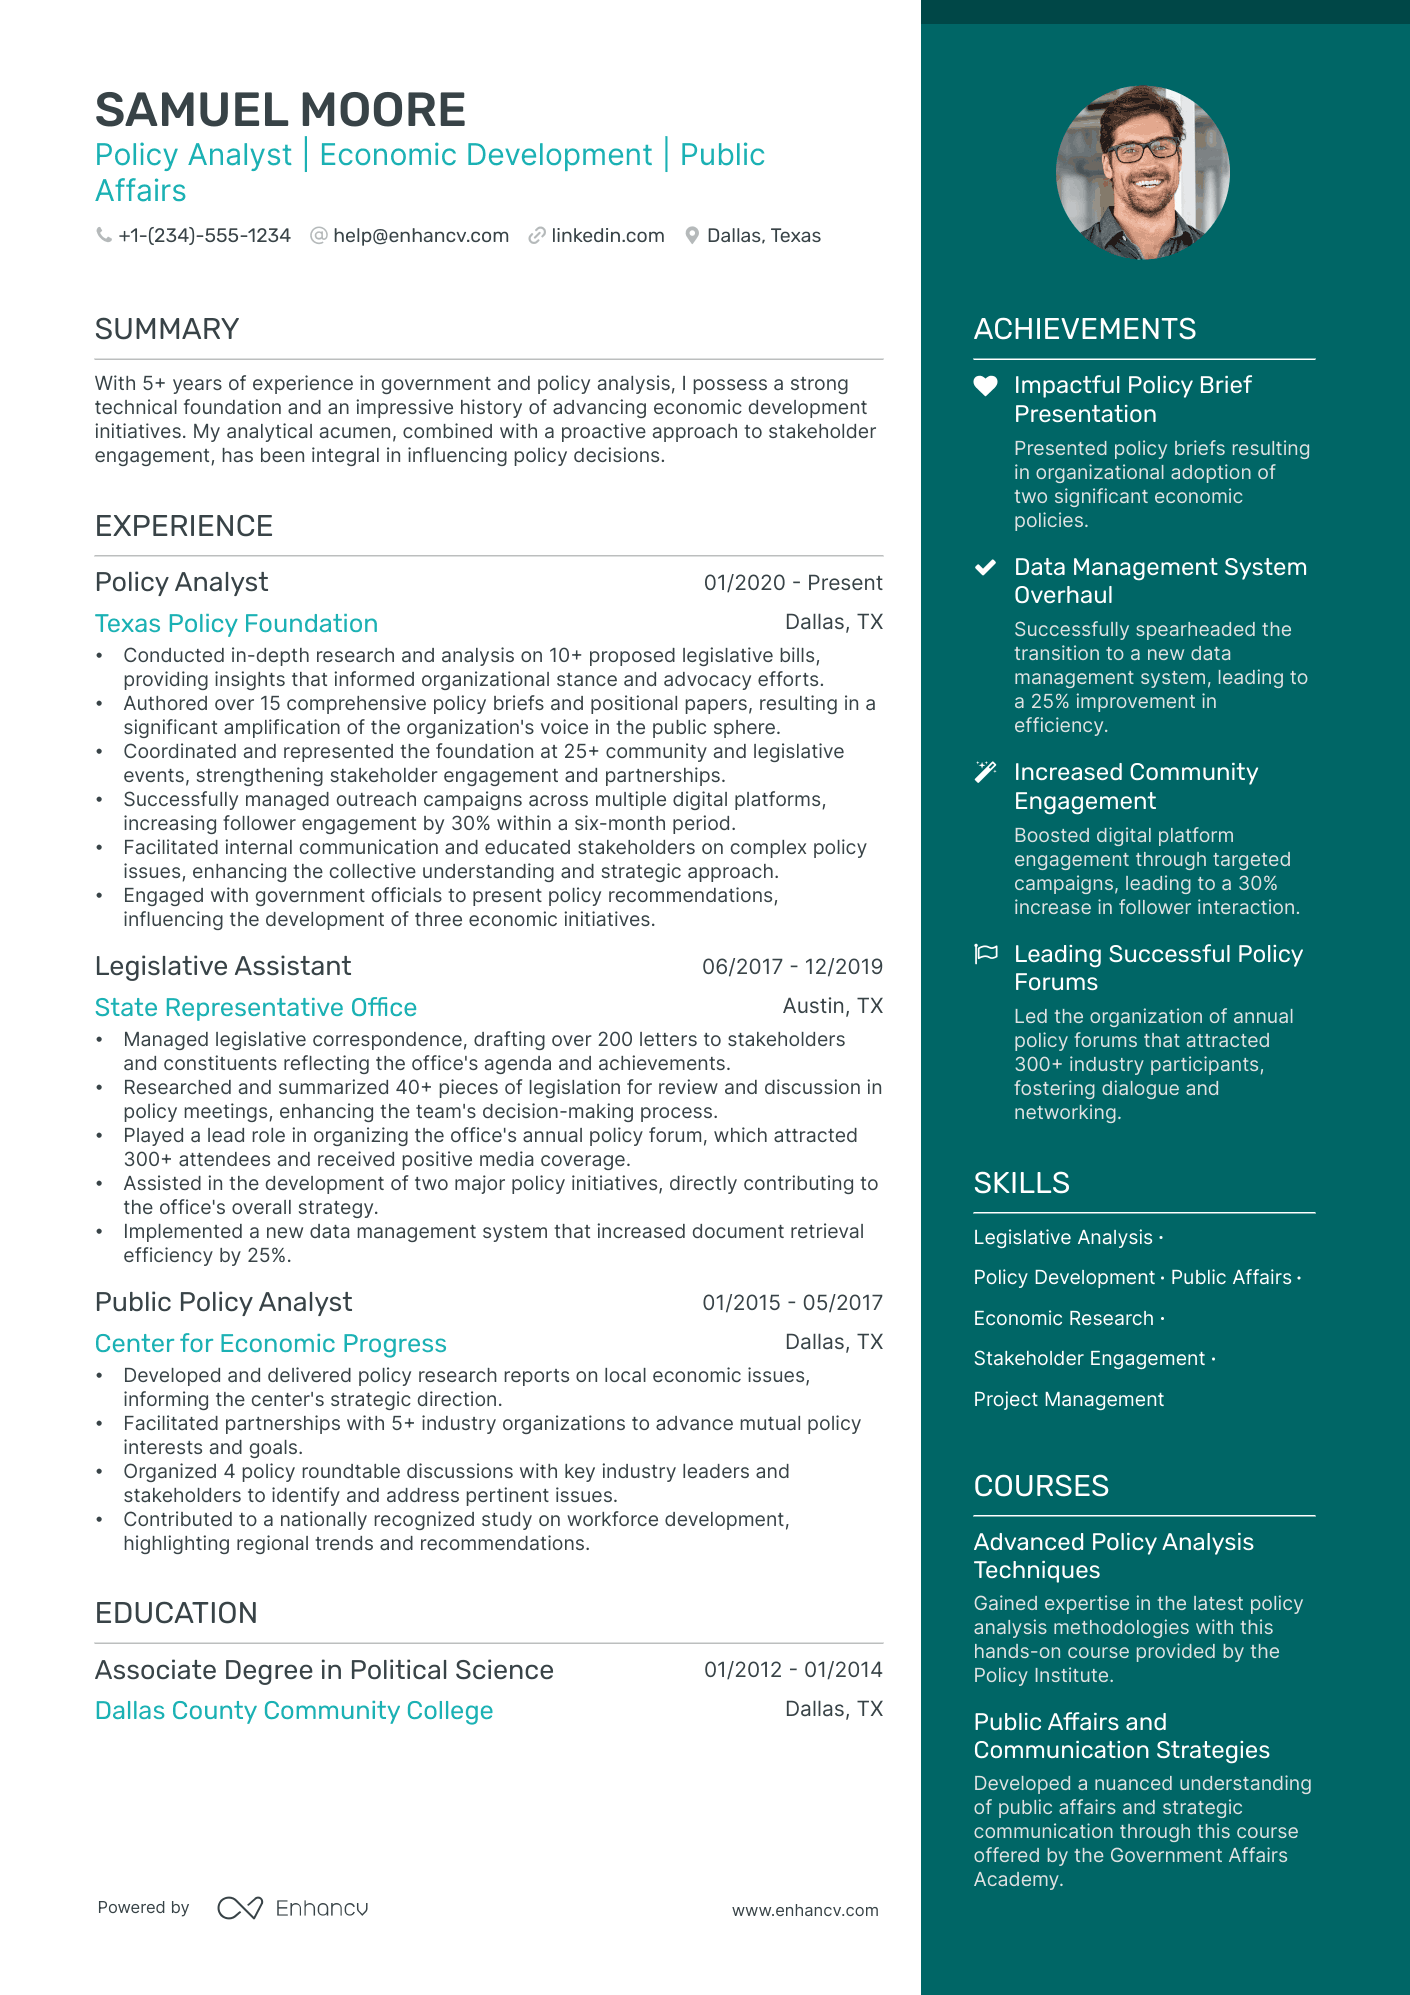 resume for government job india